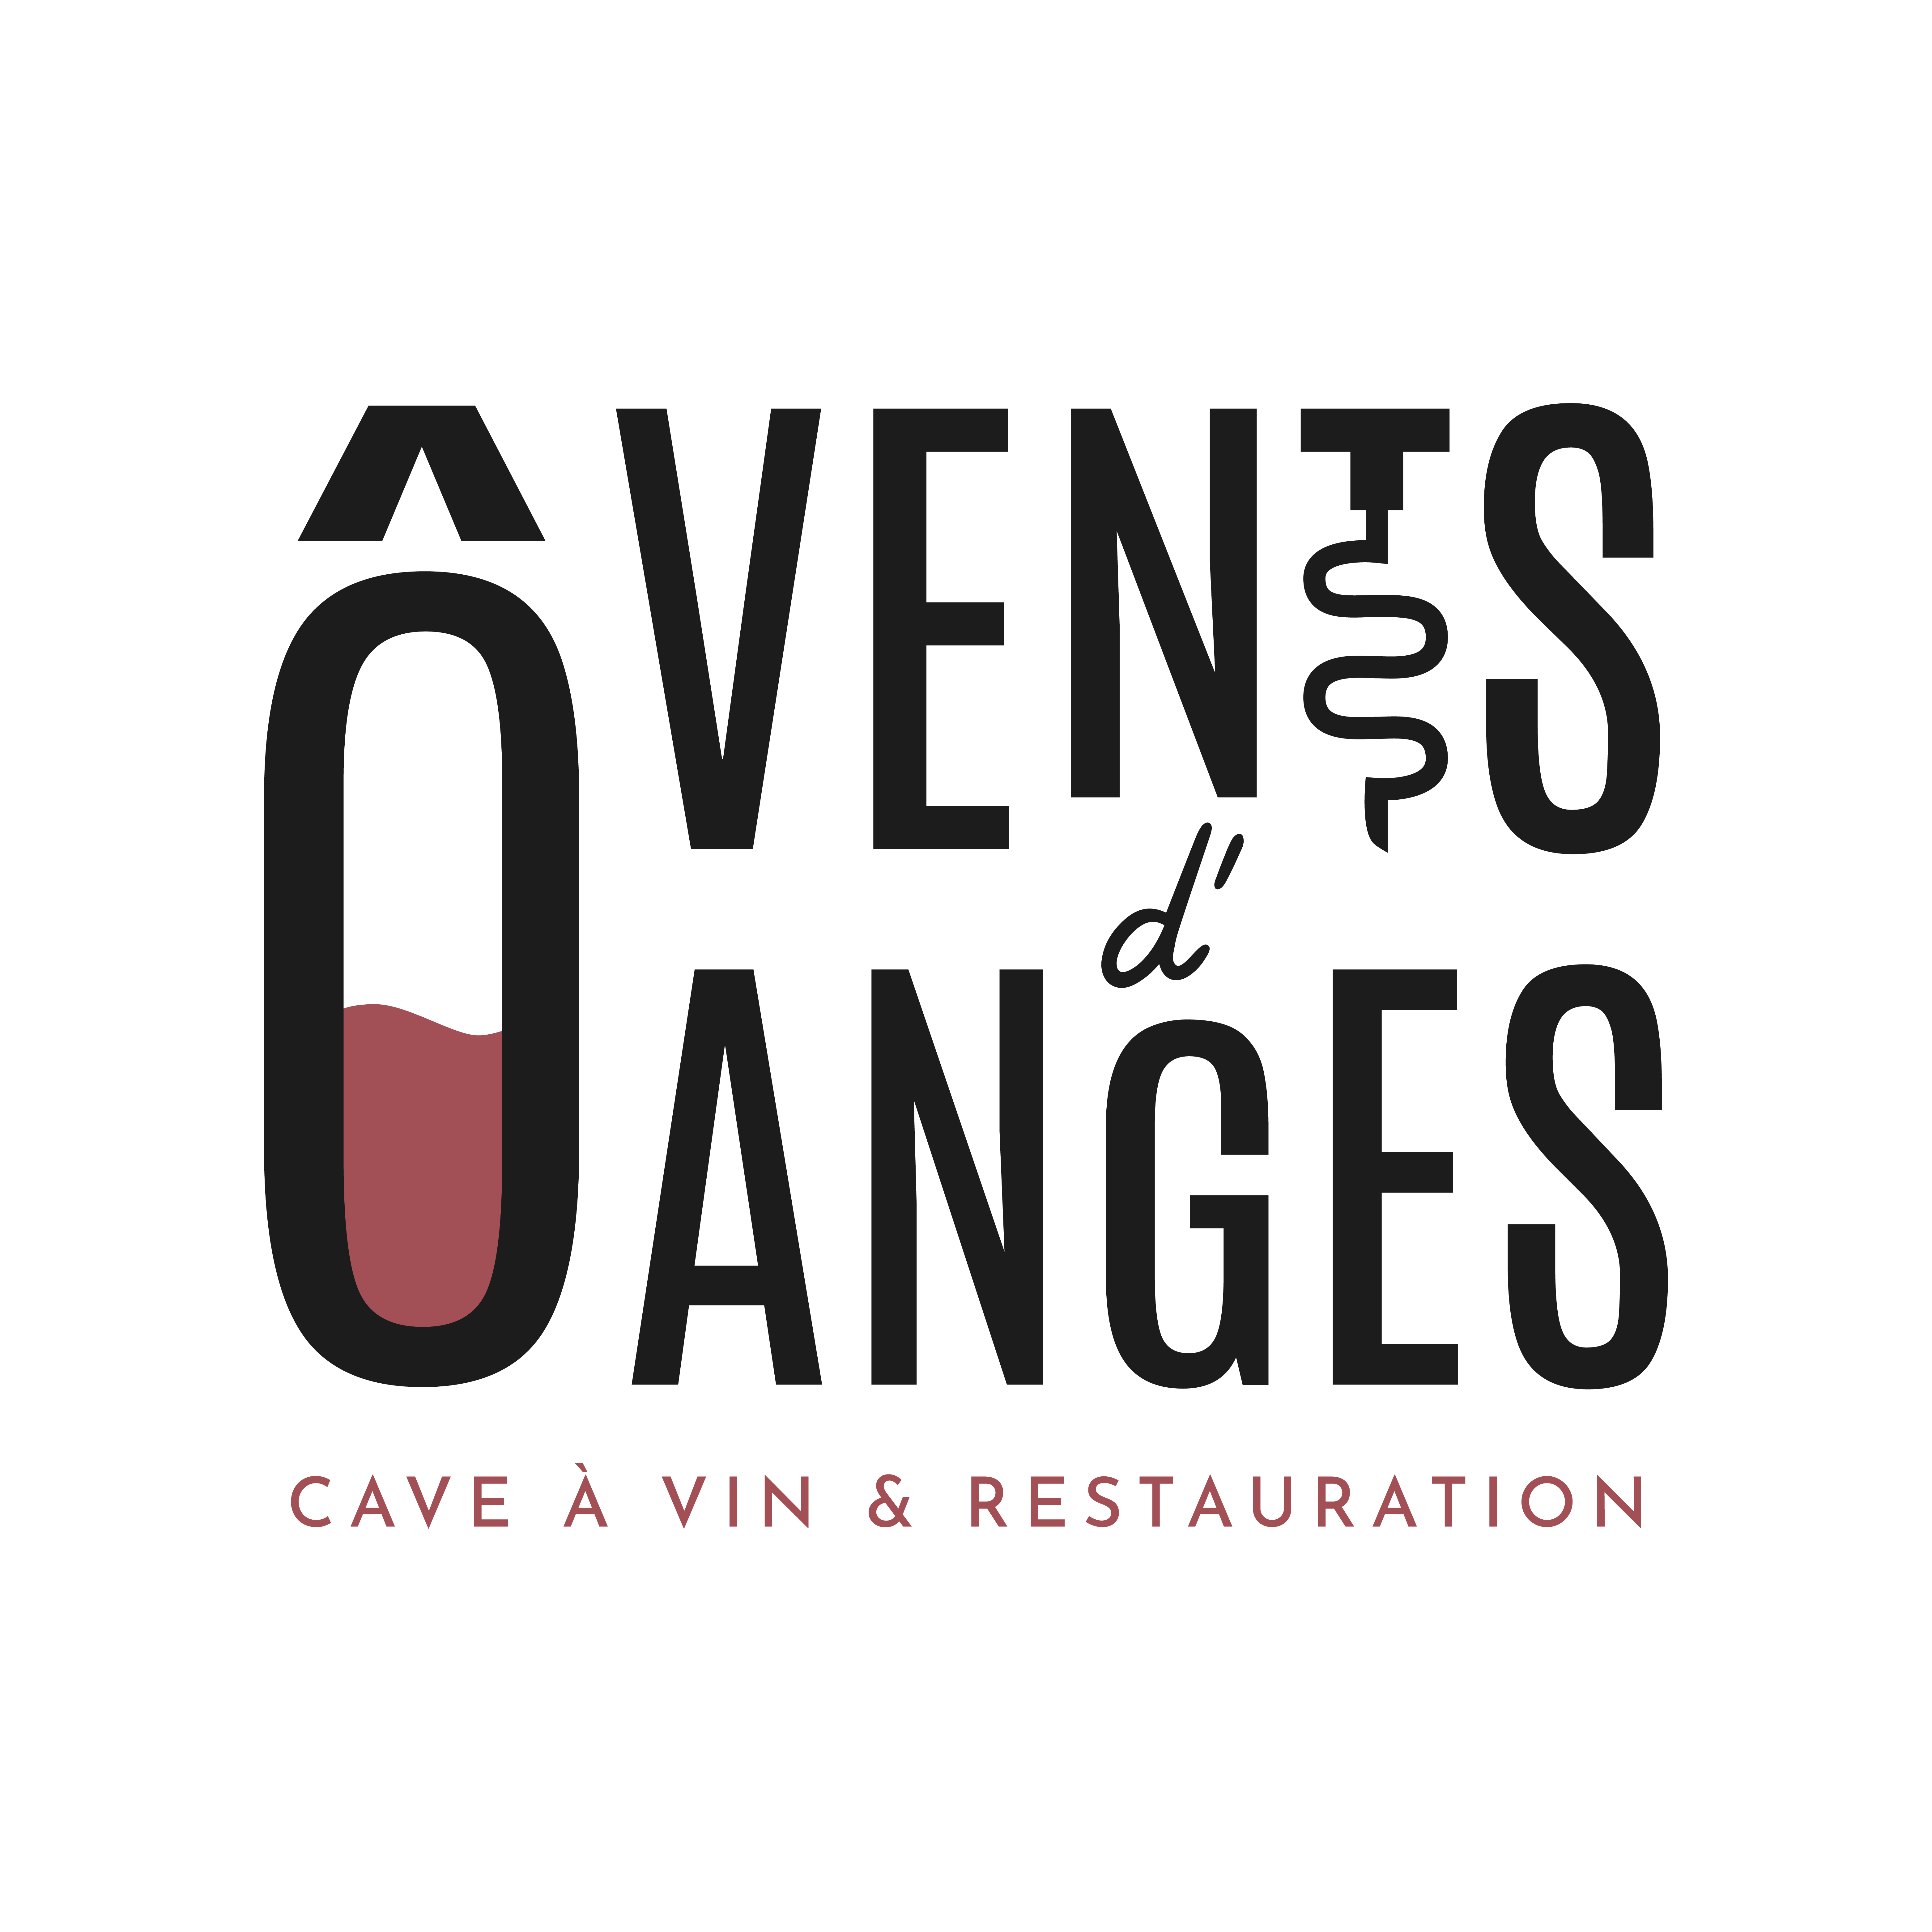 O' VENTS D'ANGES